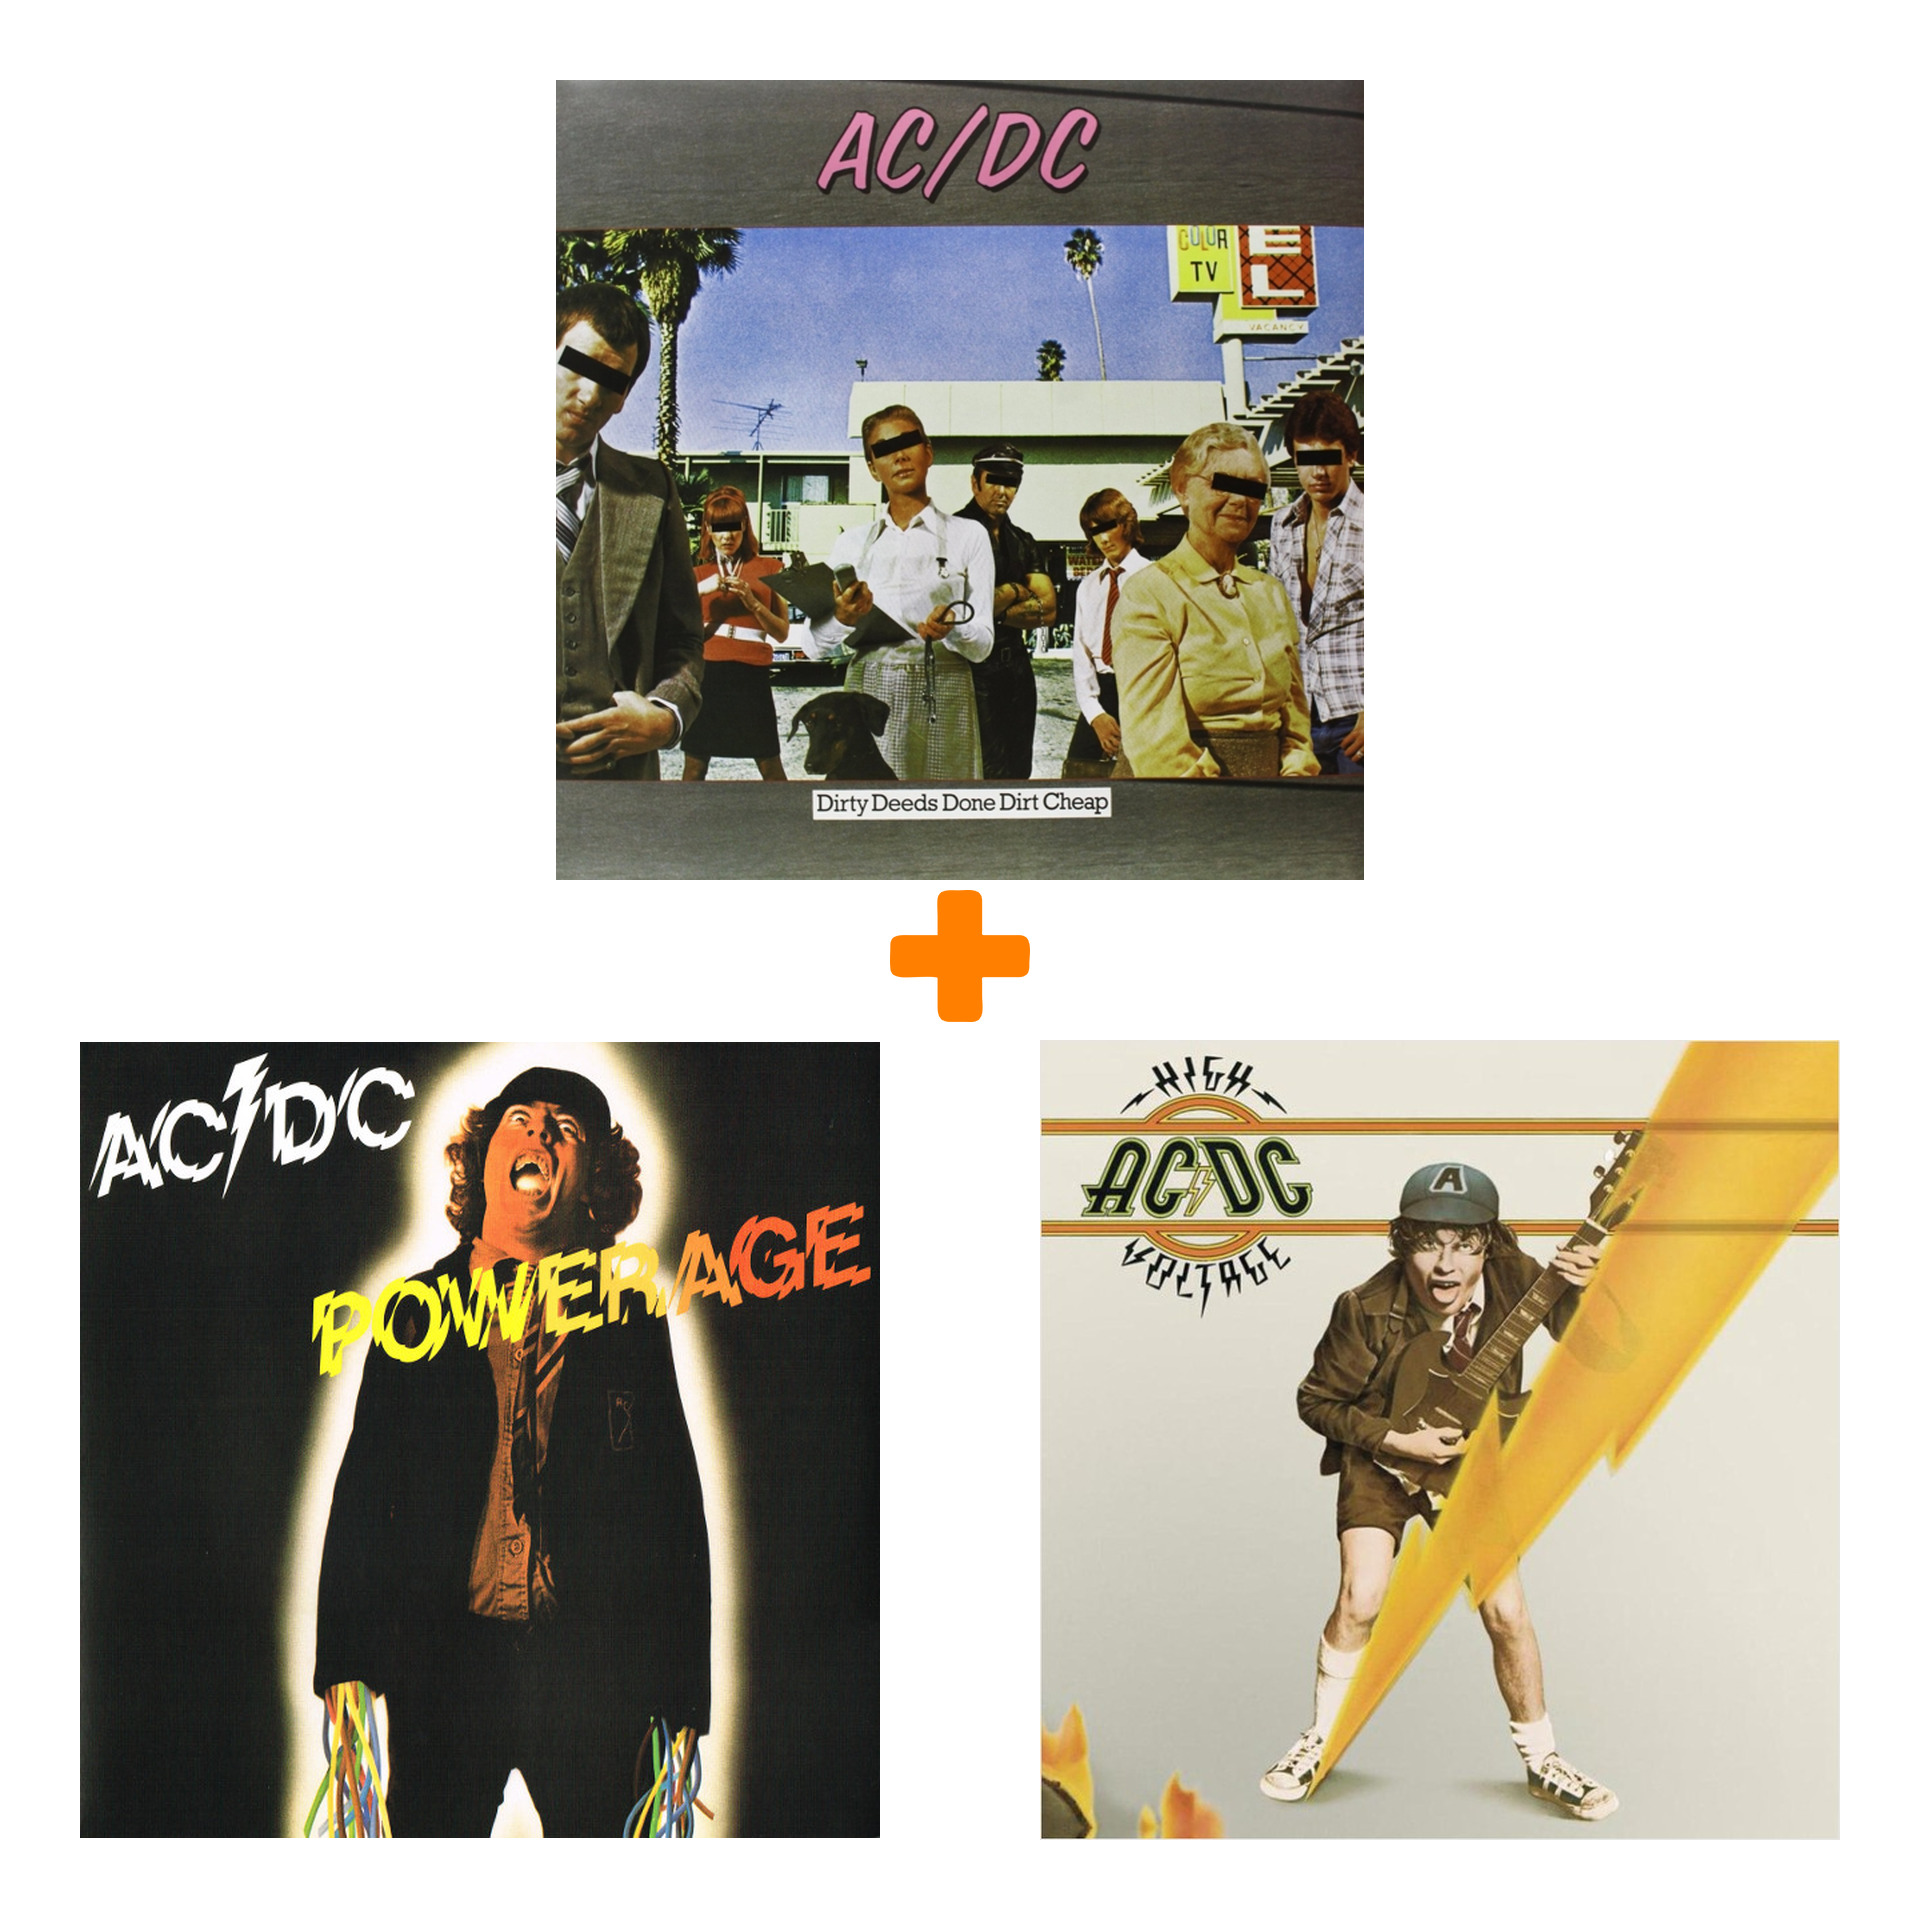 цена AC/DC – Powerage. Limited Edition (LP) + Dirty Deeds Done Dirt Cheap Limited Edition (LP) + High Voltage (LP)